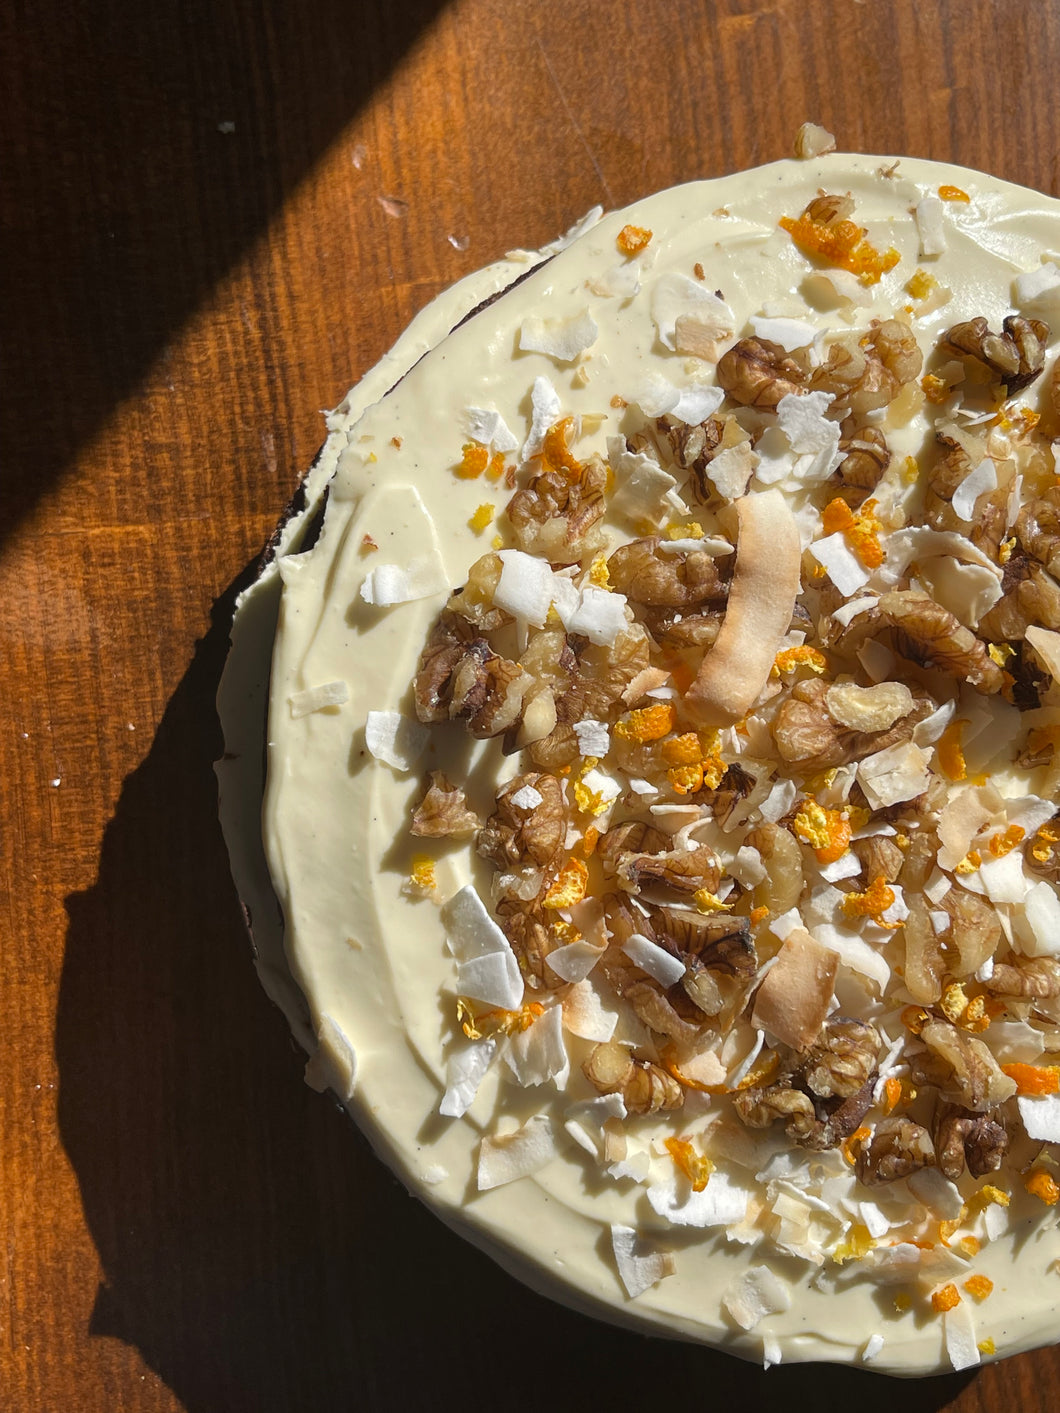 Gluten Free Carrot Cake with Cream Cheese Icing